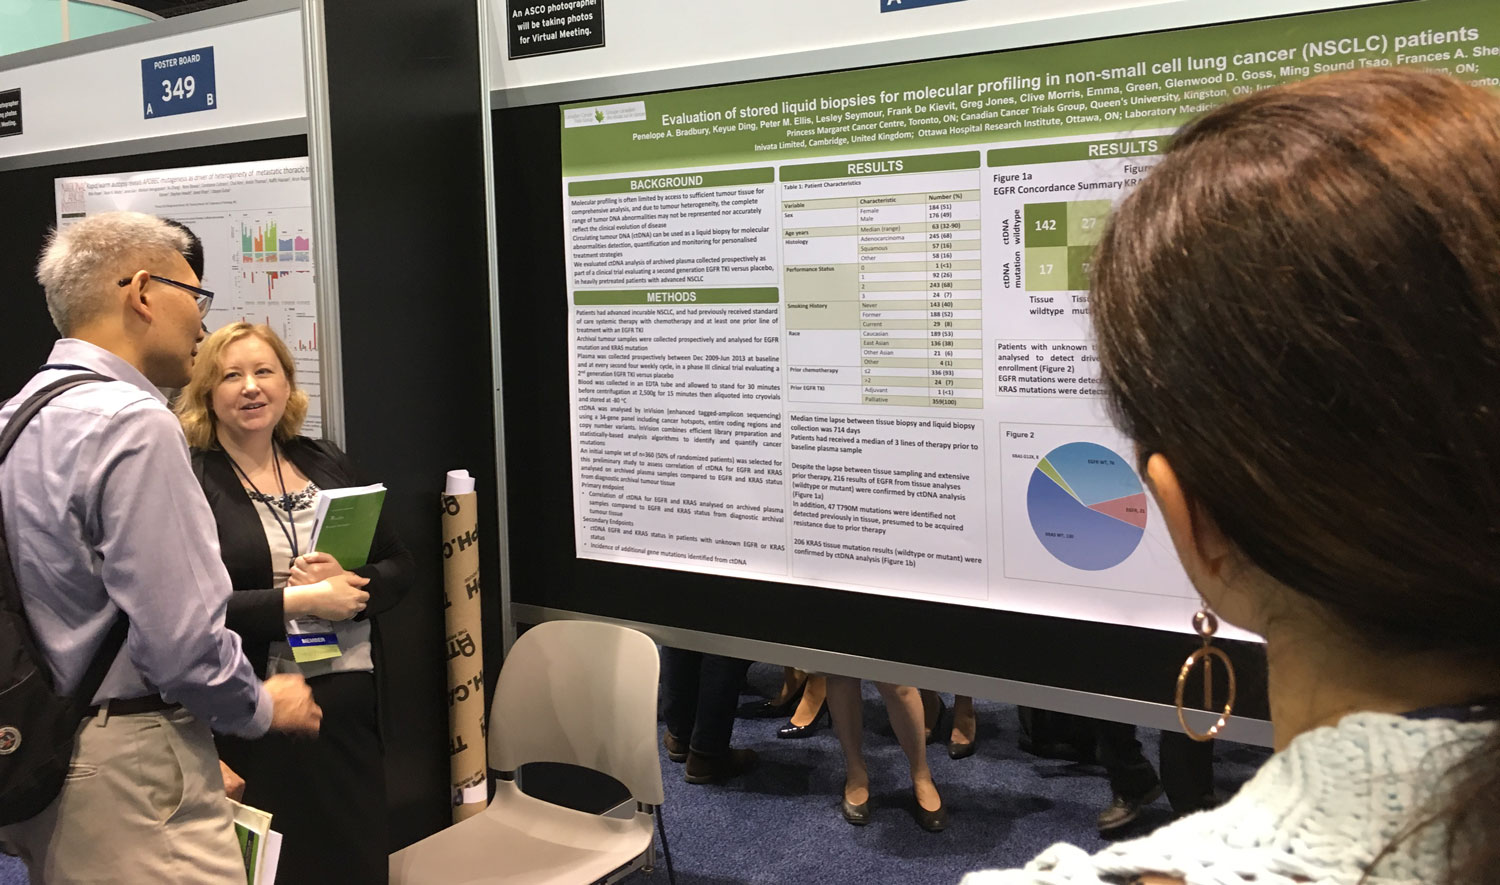 Dr. Penny Bradbury for presenting Evaluation of stored liquid biopsies for molecular profiling for #CCTG at #ASCO17